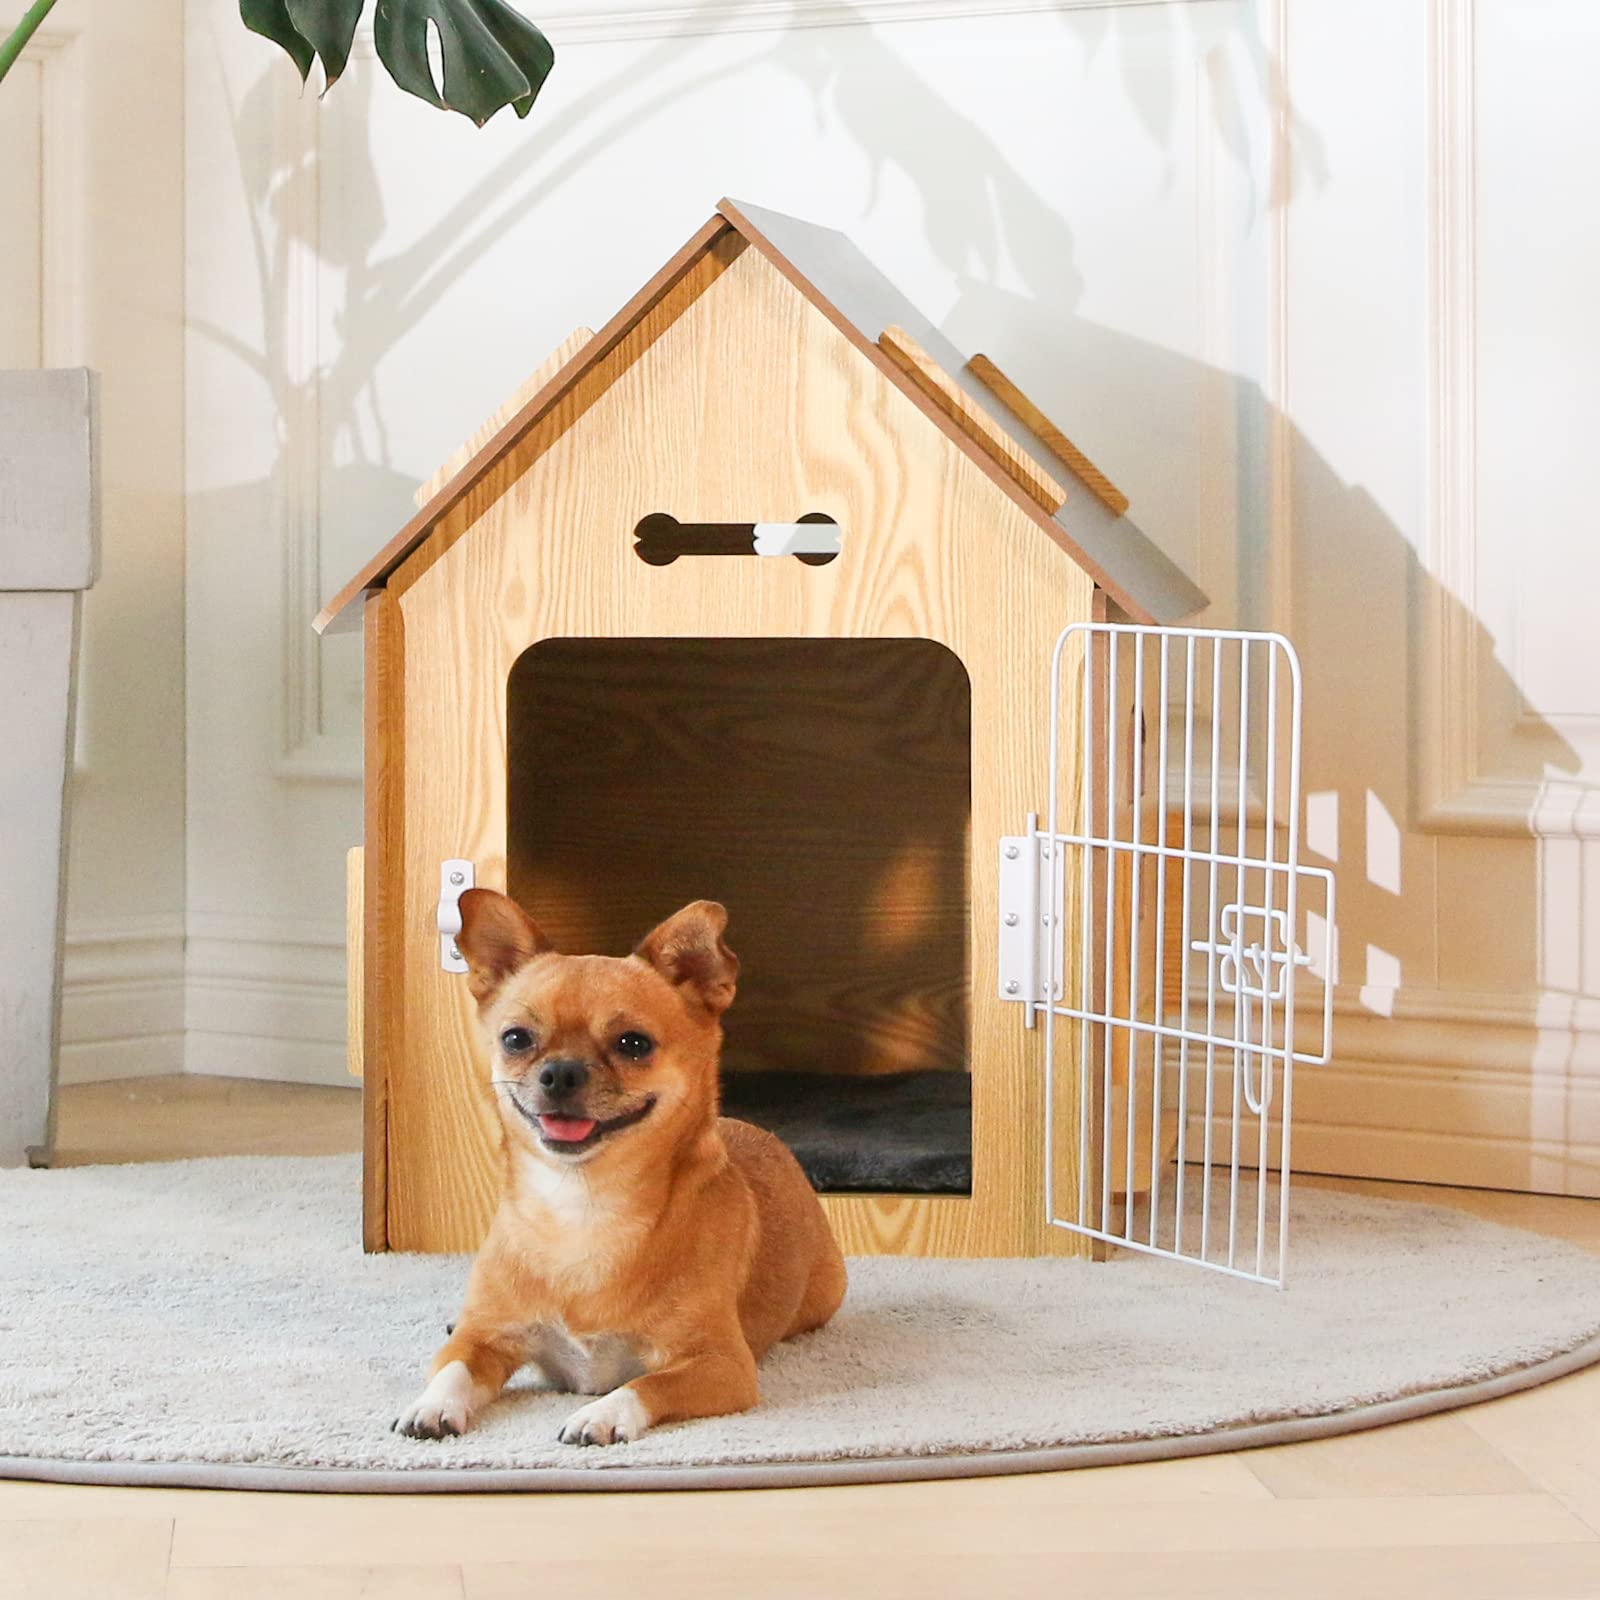 Dog House Indoor for Small Dogs or Cats, Cozy Wooden Design, Small Indoor Bed House, with Air Vents and Elevated Floor Warm Dog Cave (Color-1)